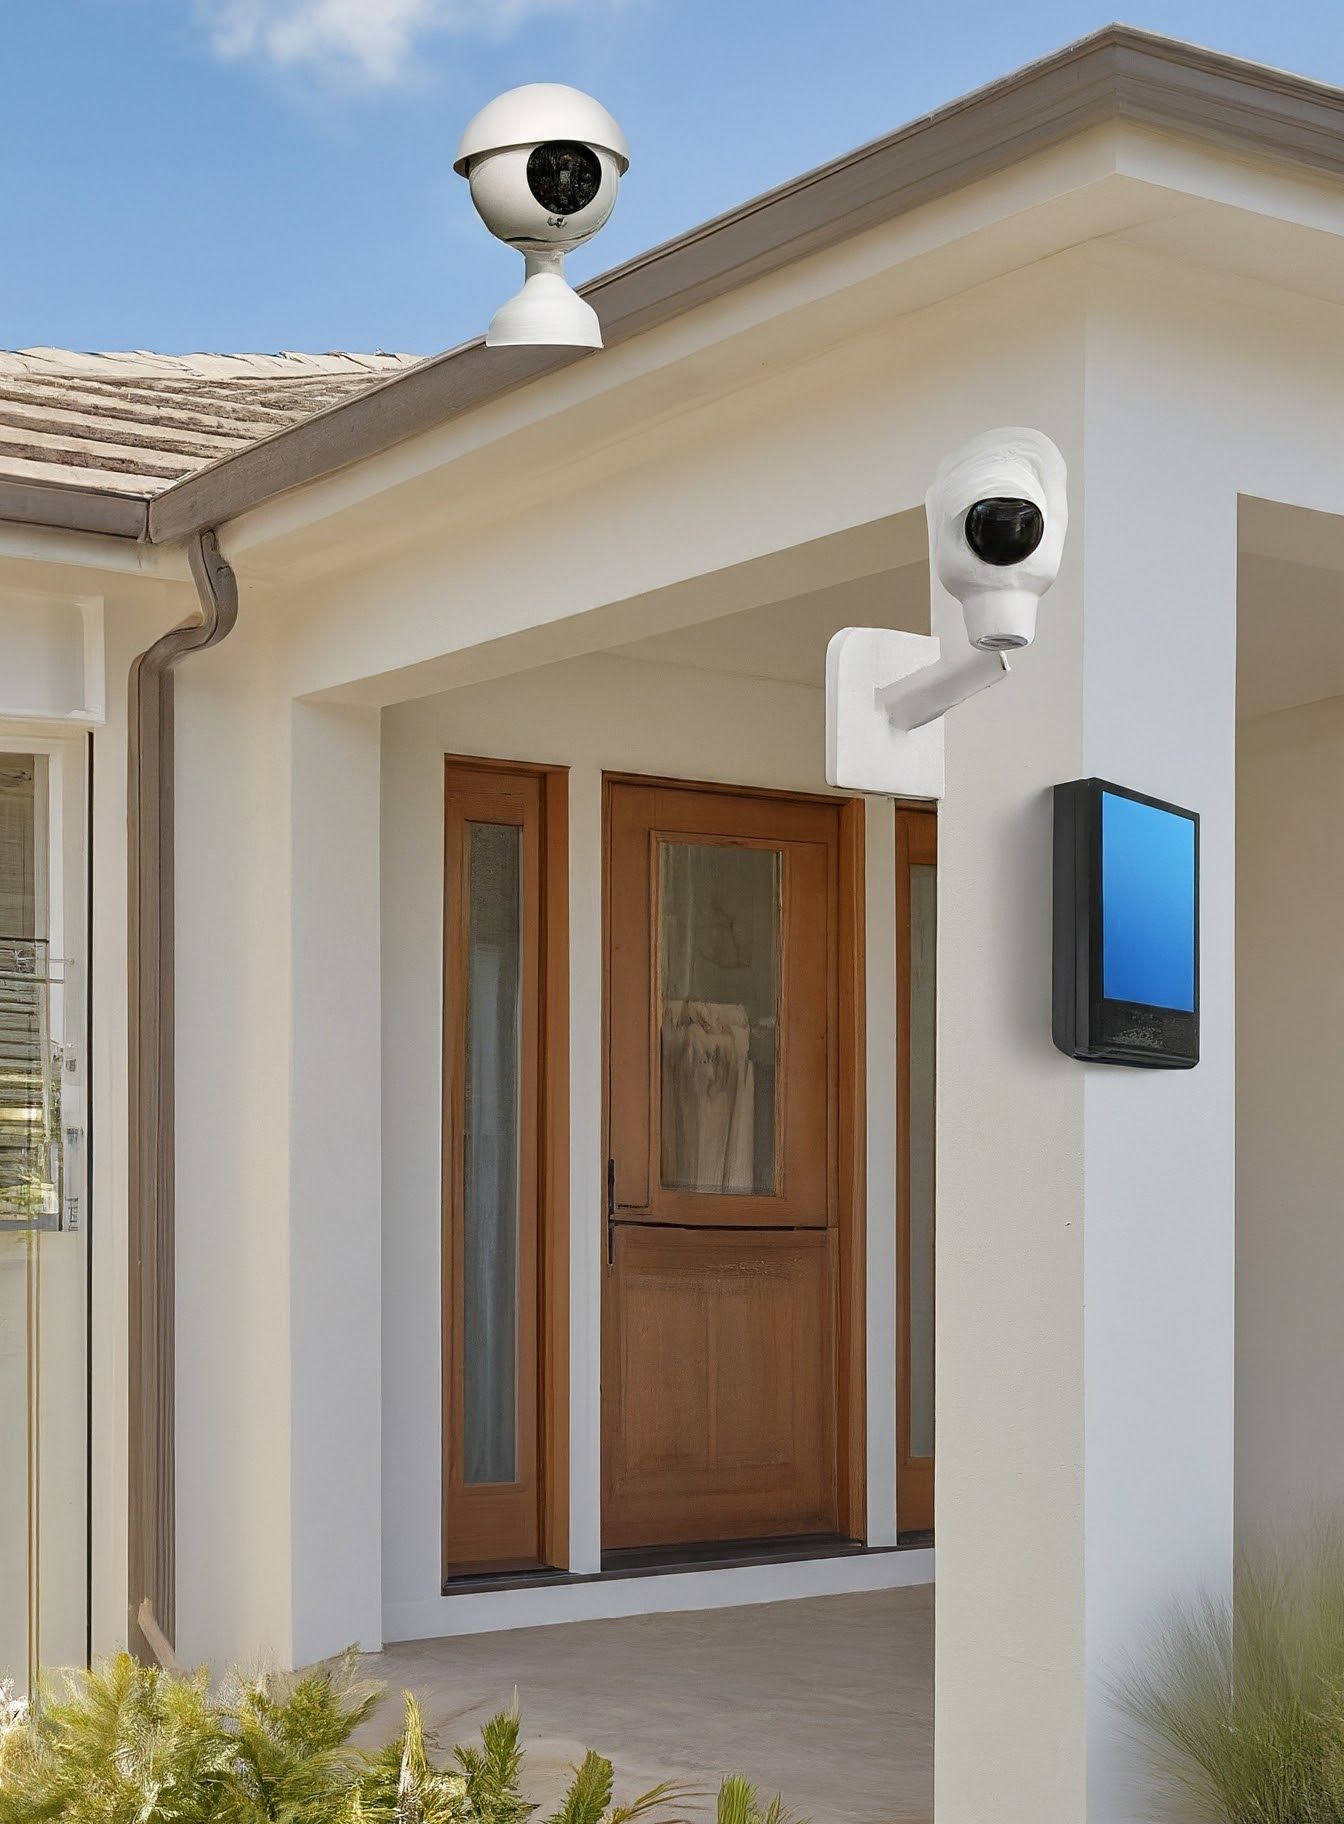 Example 2 of PMAX's AI Image Generator with security cameras outside a house